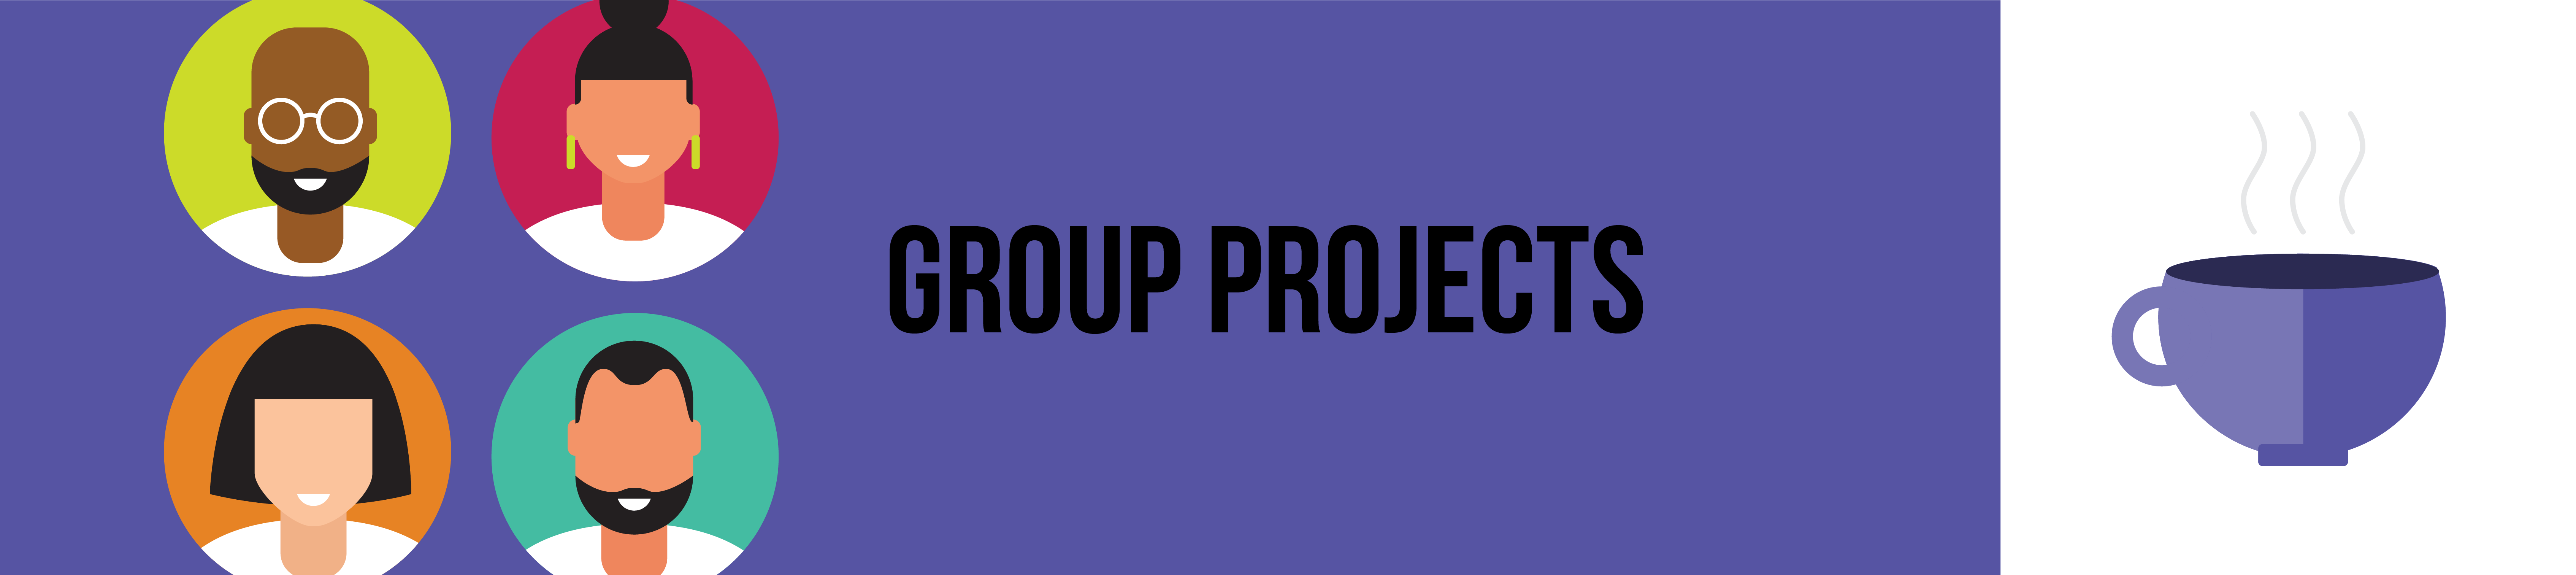 Group projects title graphic